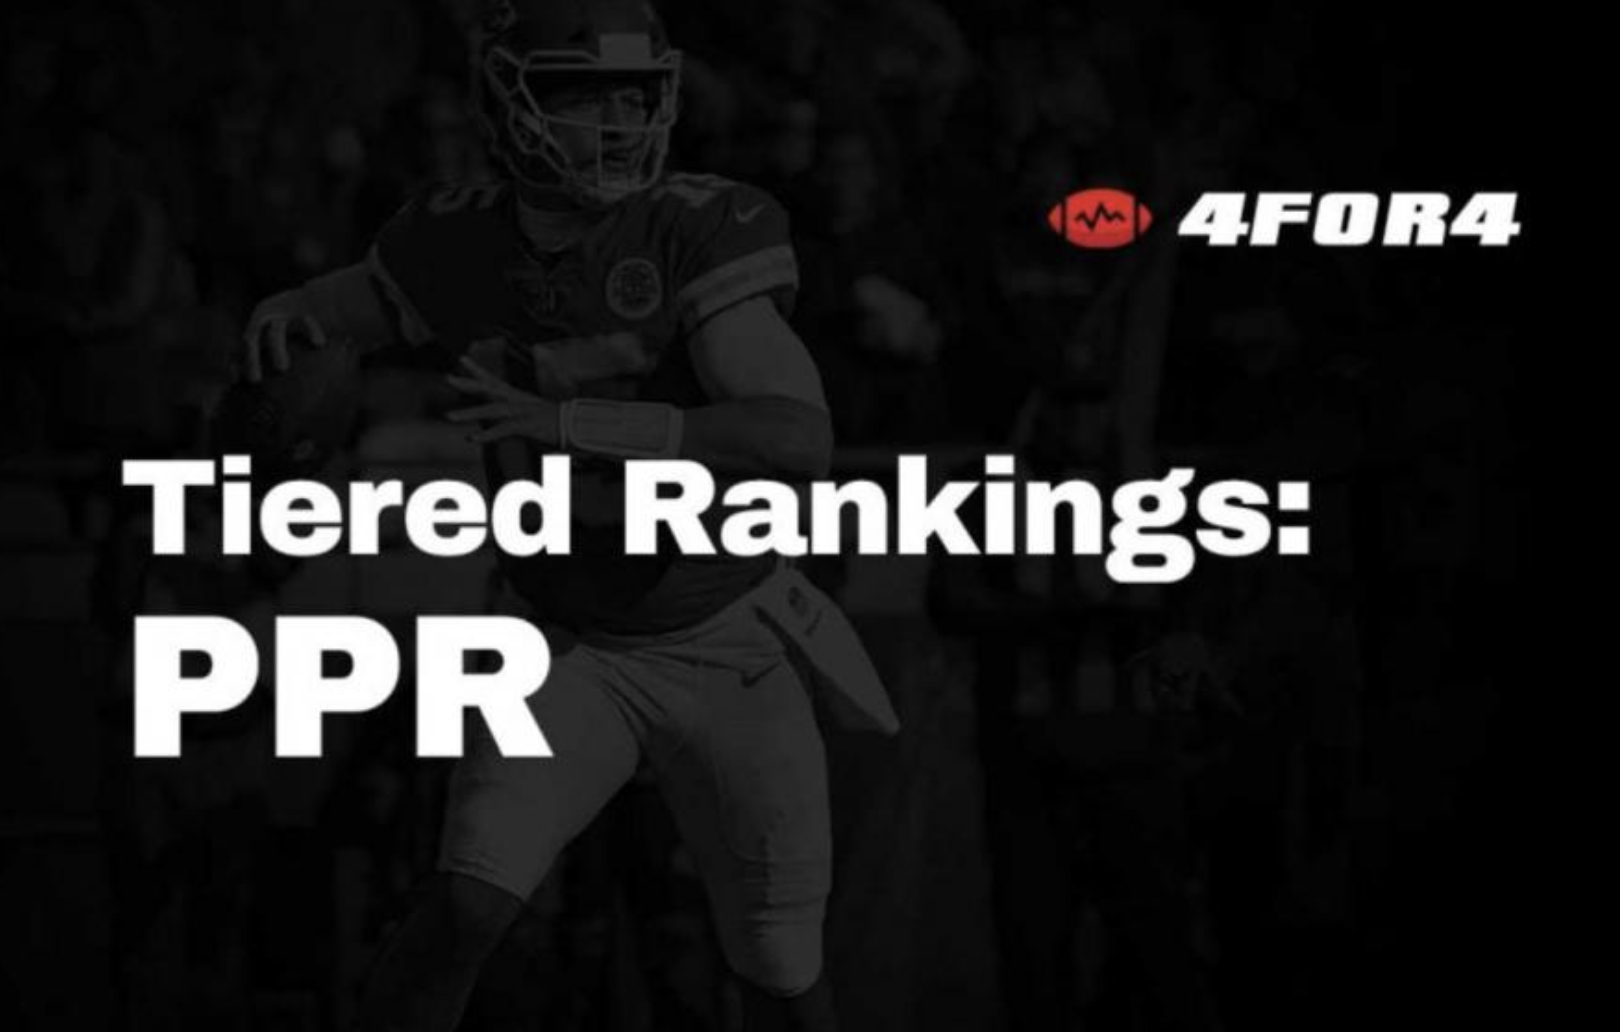 Tiered Rankings for PPR Fantasy Football Leagues 4for4